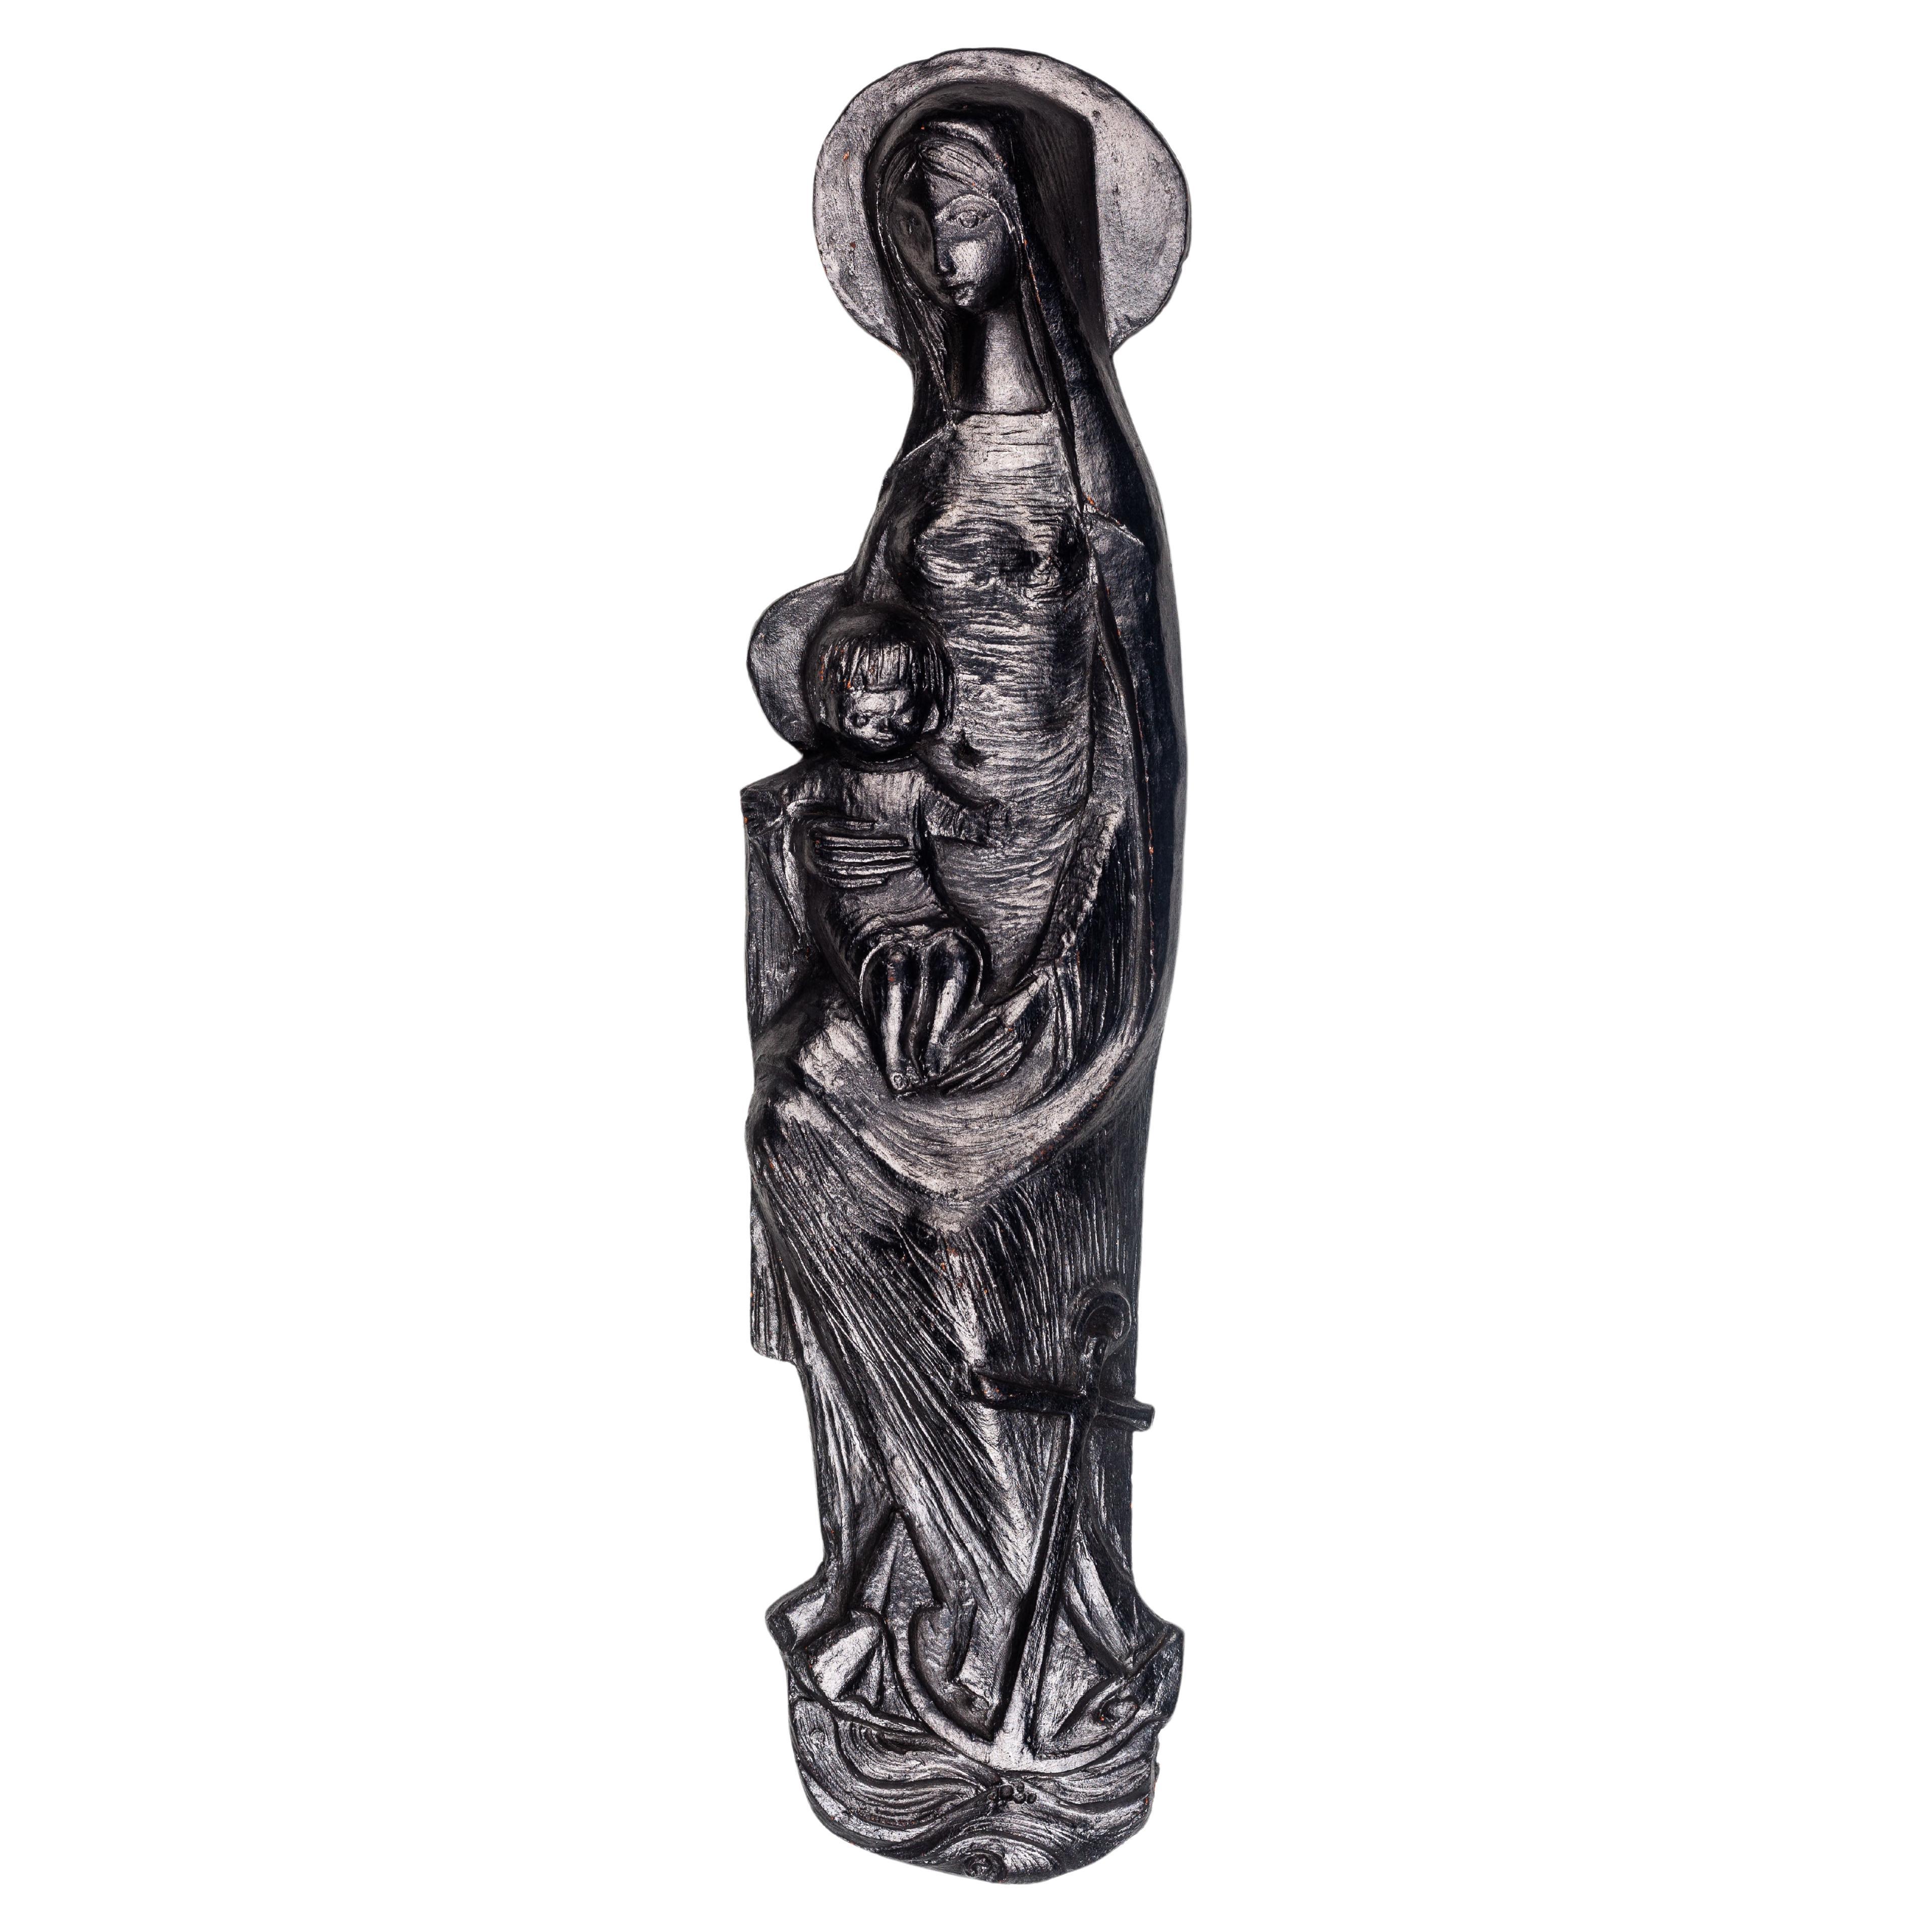 22-Inch Black Ceramic Wall Decoration - Virgin Mary with Anchor Among the Waves